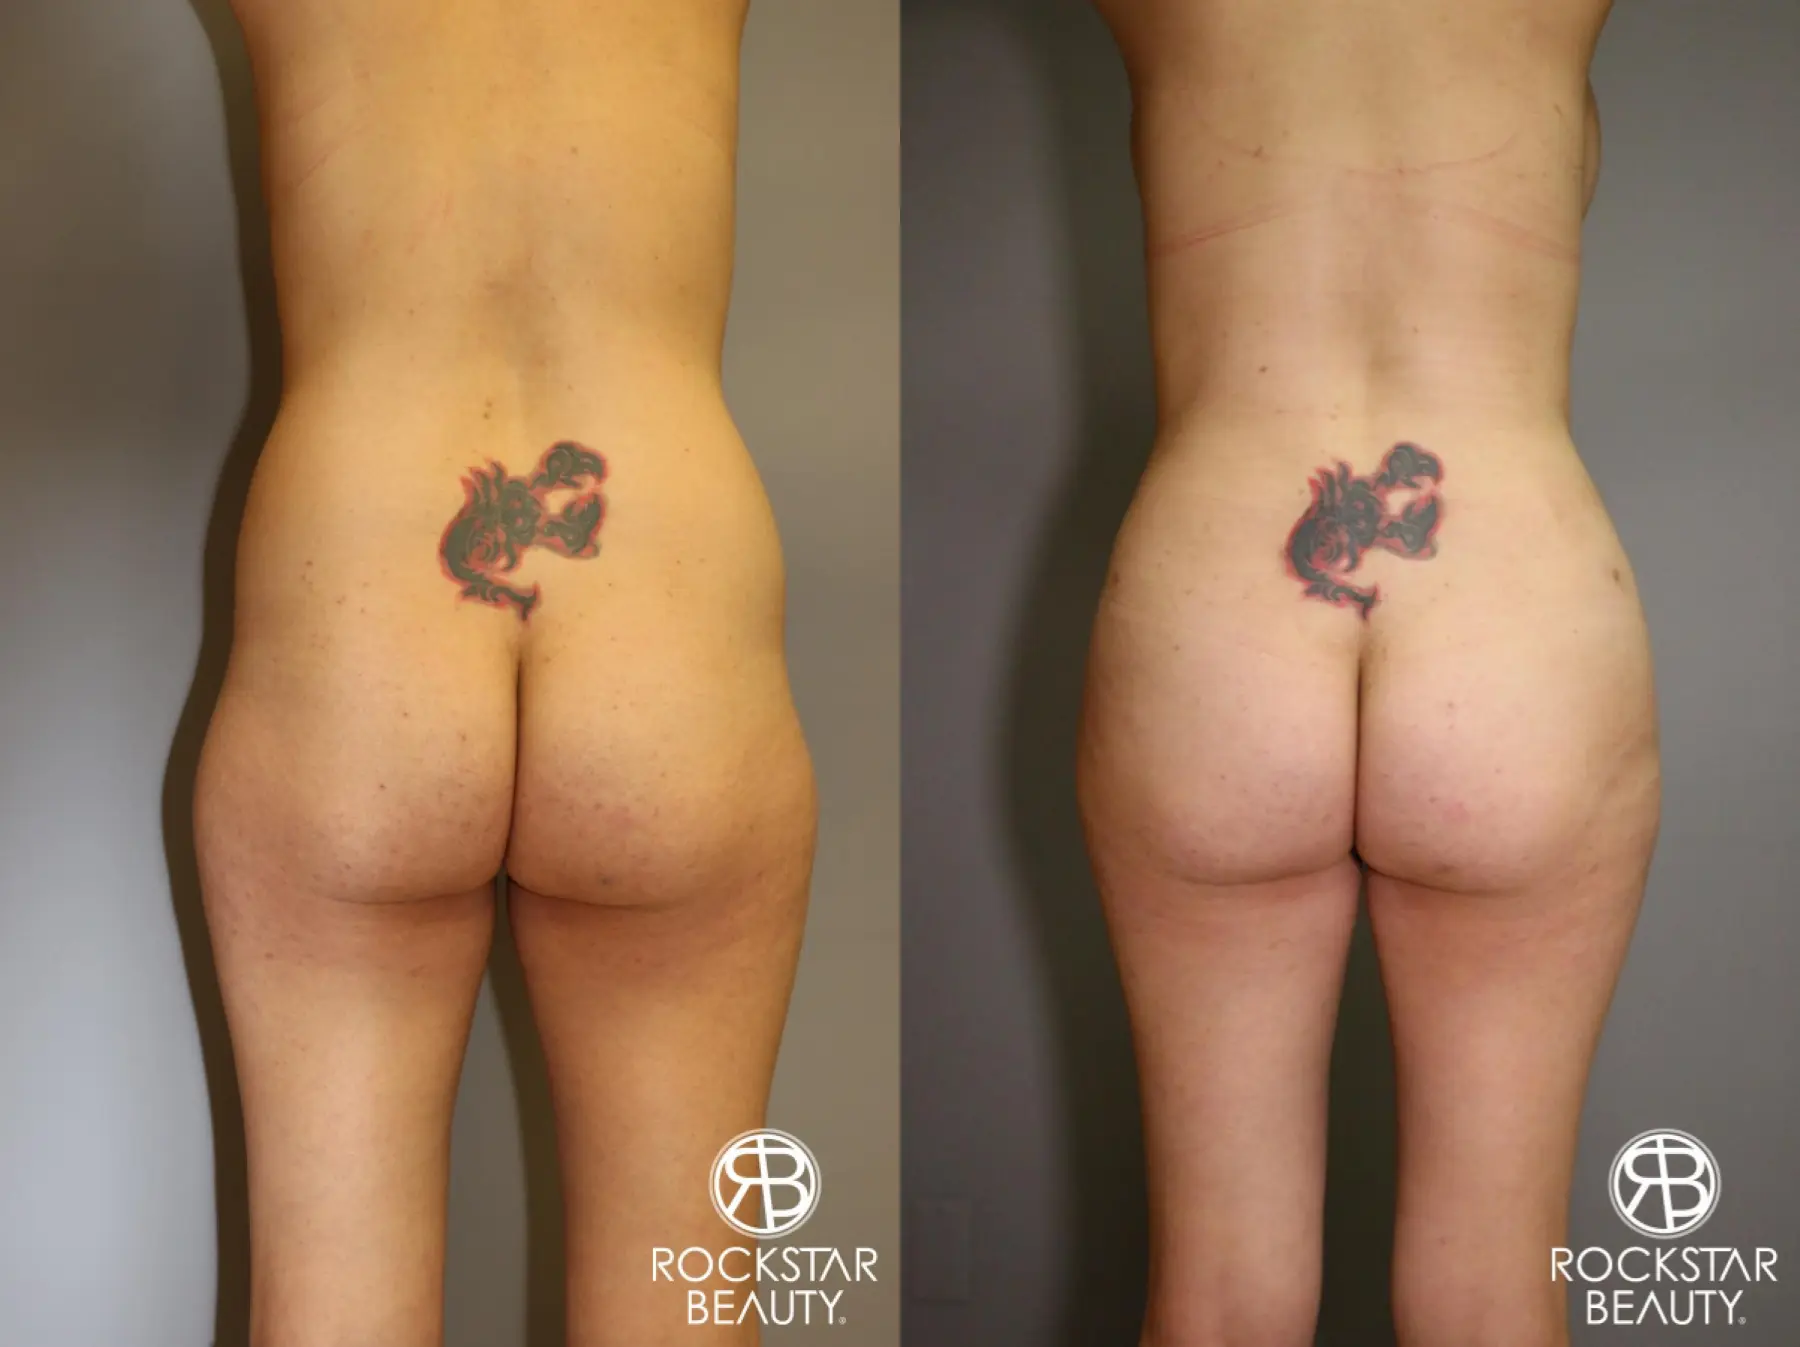 Liposuction: Patient 2 - Before and After 1